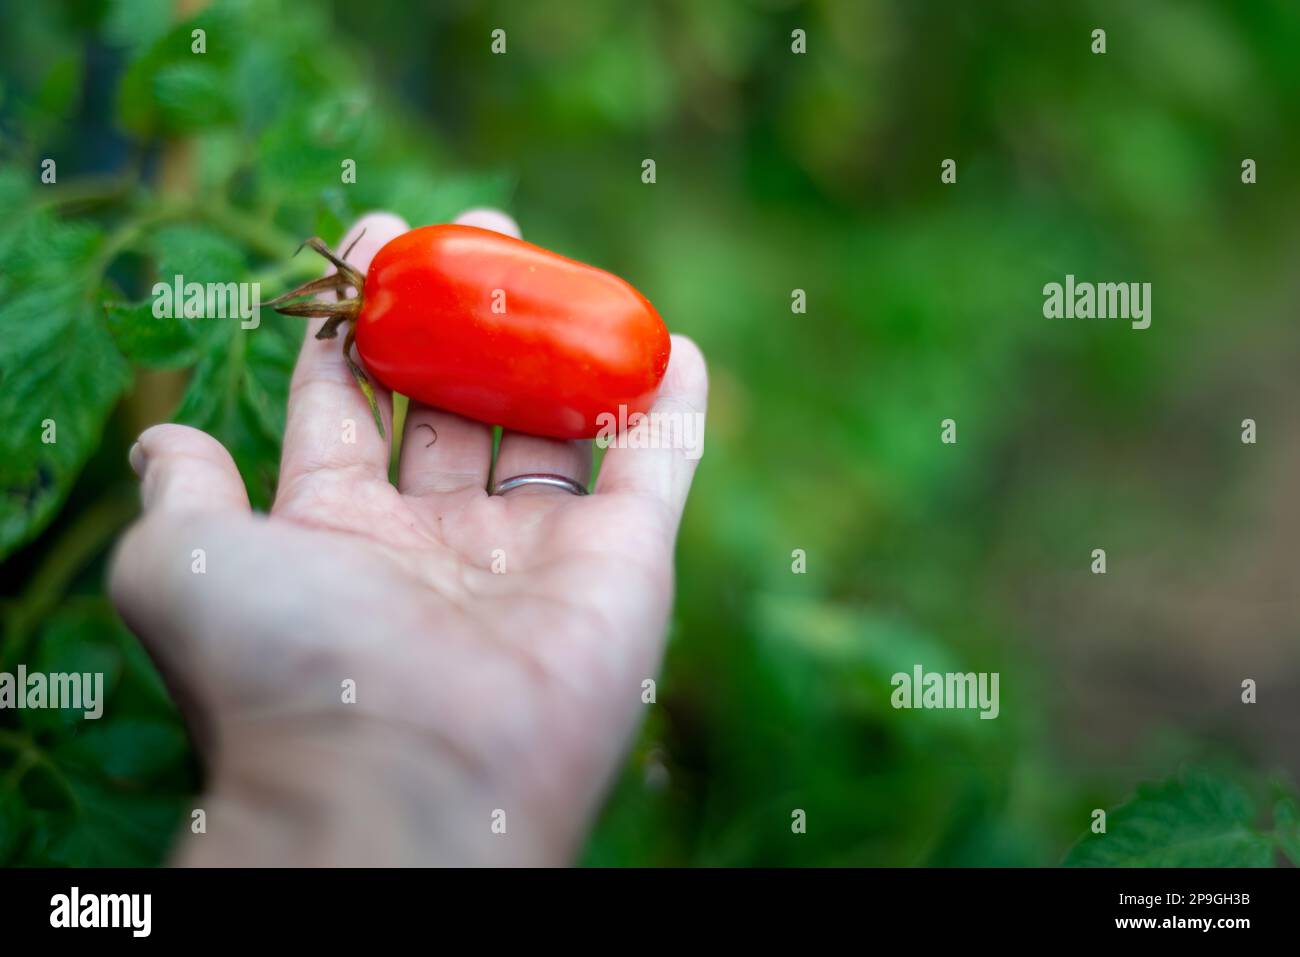 Hand holds a ripe red tomato among green tomato plants in the backyard garden. Stock Photo